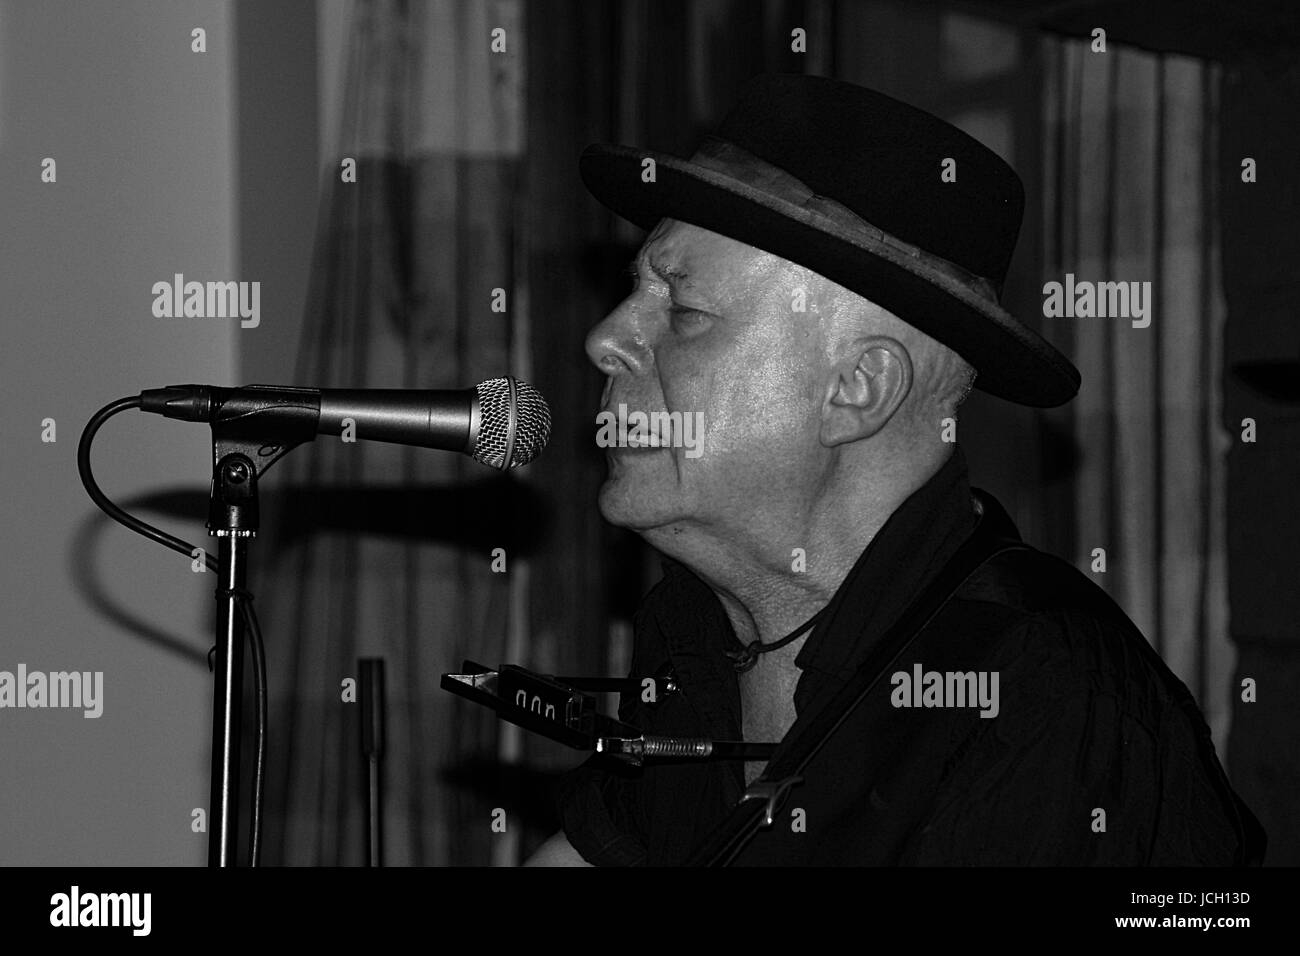 Dave Sharp, former lead guitarist with The Alarm, during a solo acoustic performance at The Village Inn, East Kilbride. Stock Photo